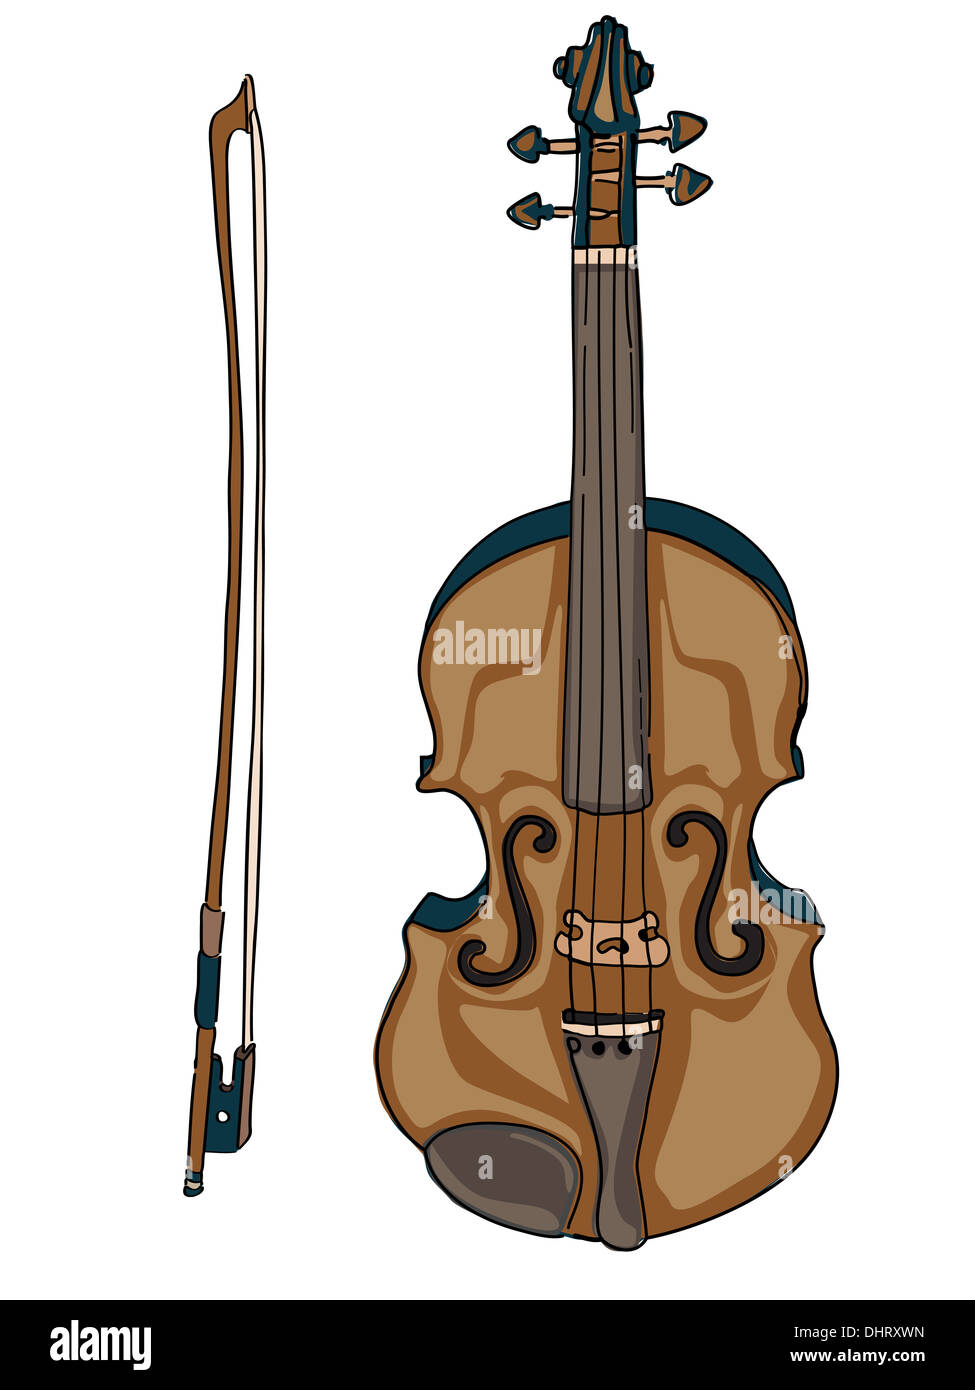 Violin making drawing Cut Out Stock Images & Pictures - Alamy